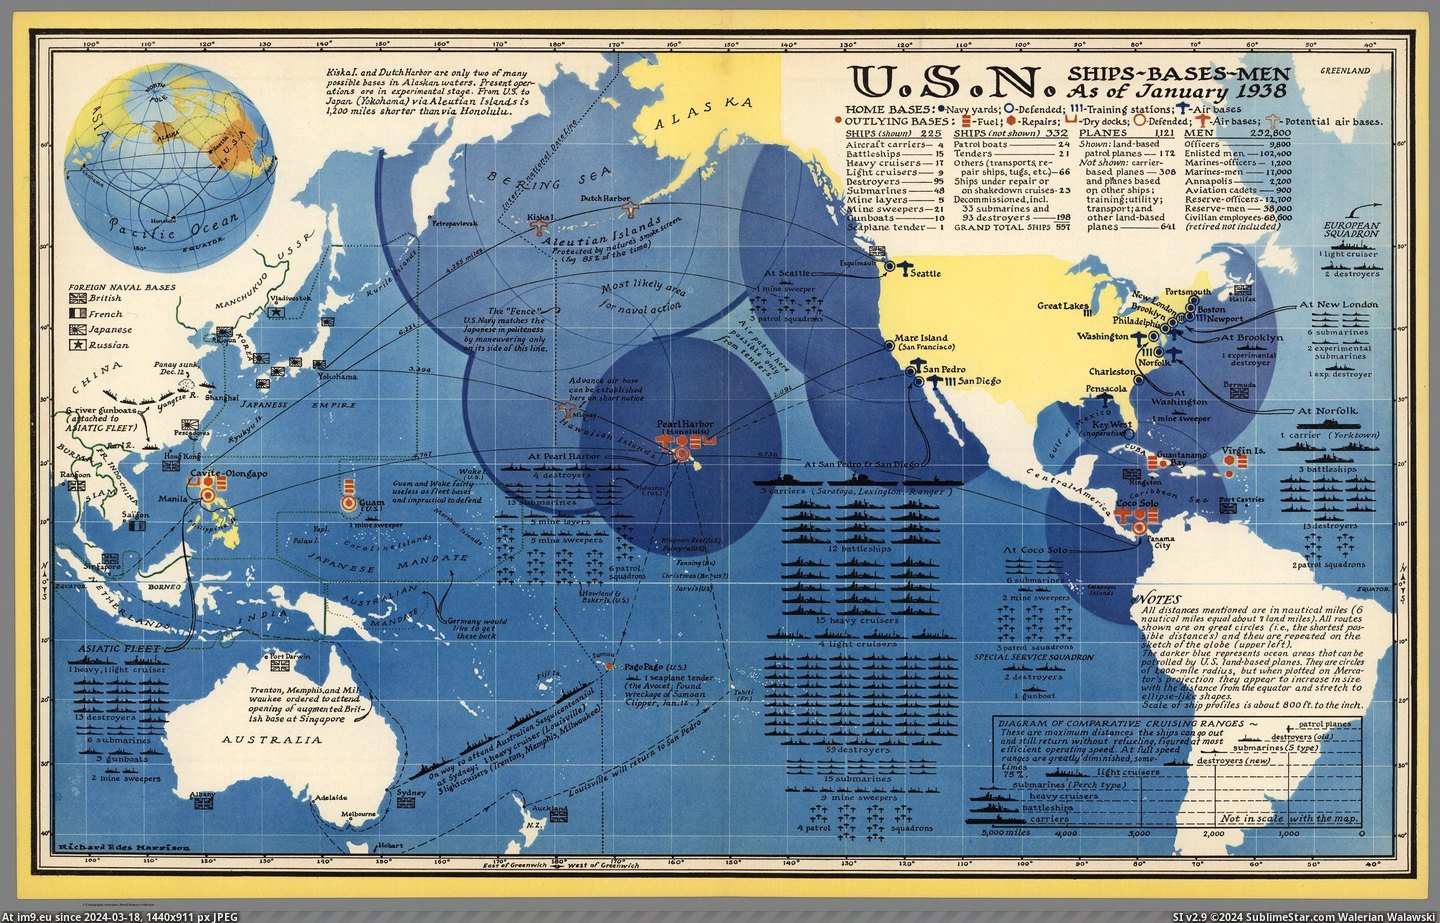 #States #Men #Navy #Ships #Bases #United #Military [Mapporn] The United States Navy. Ships, bases and men as of January 1938 [5678x3605] ( -r-military) Pic. (Изображение из альбом My r/MAPS favs))